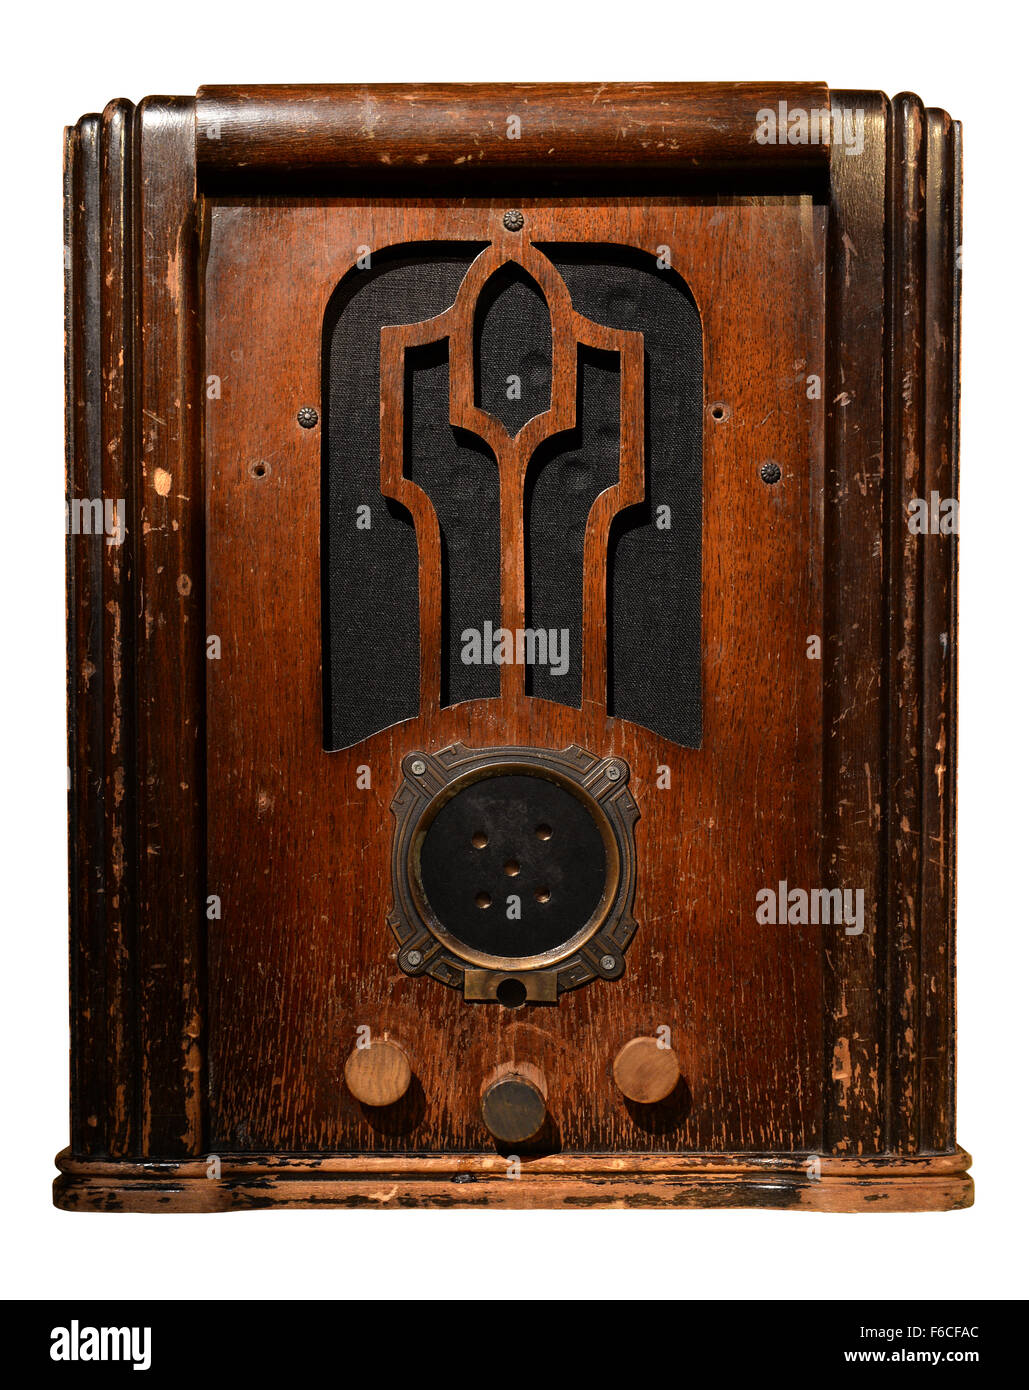 Vintage radio isolated over white background - With clipping path Banque D'Images